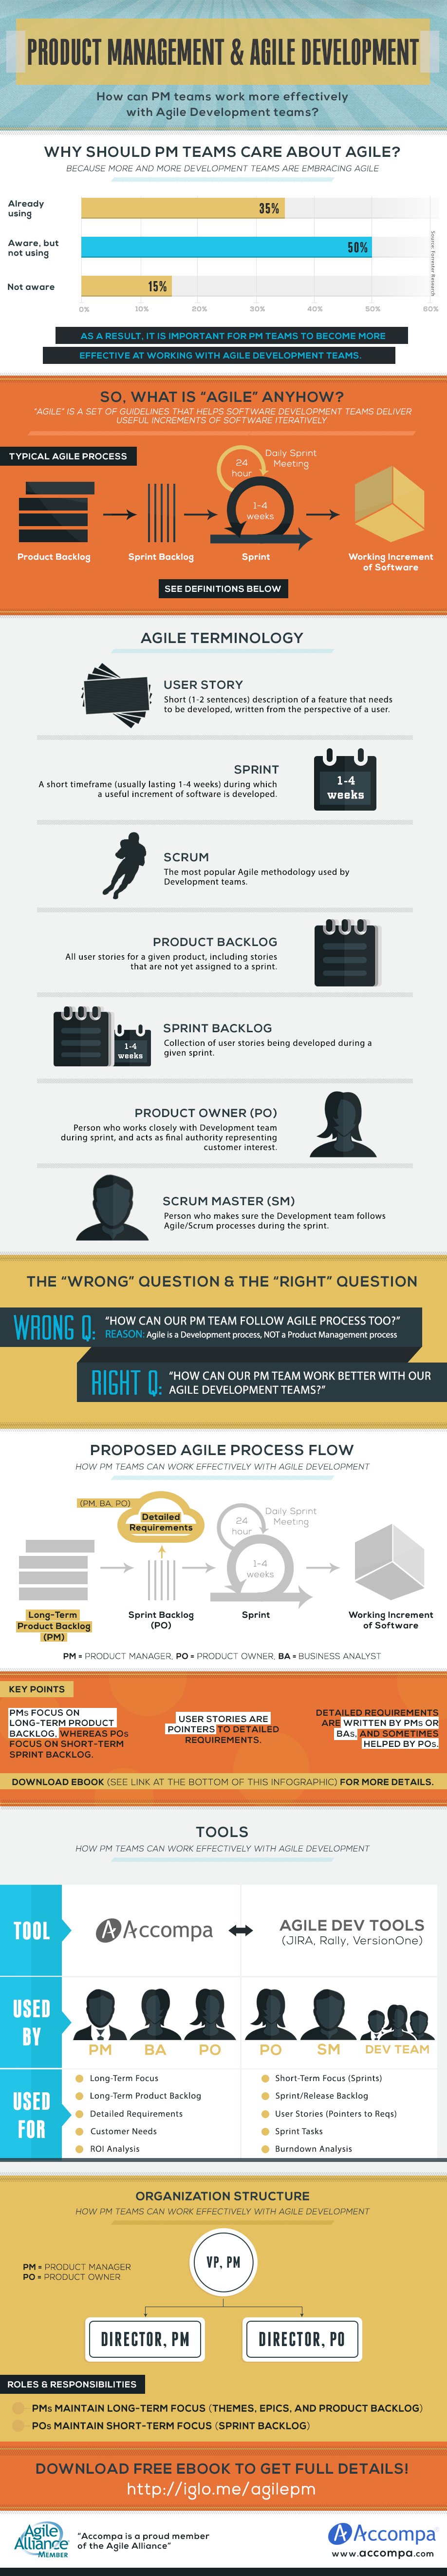 Product-Management-and-Agile-Development-v3